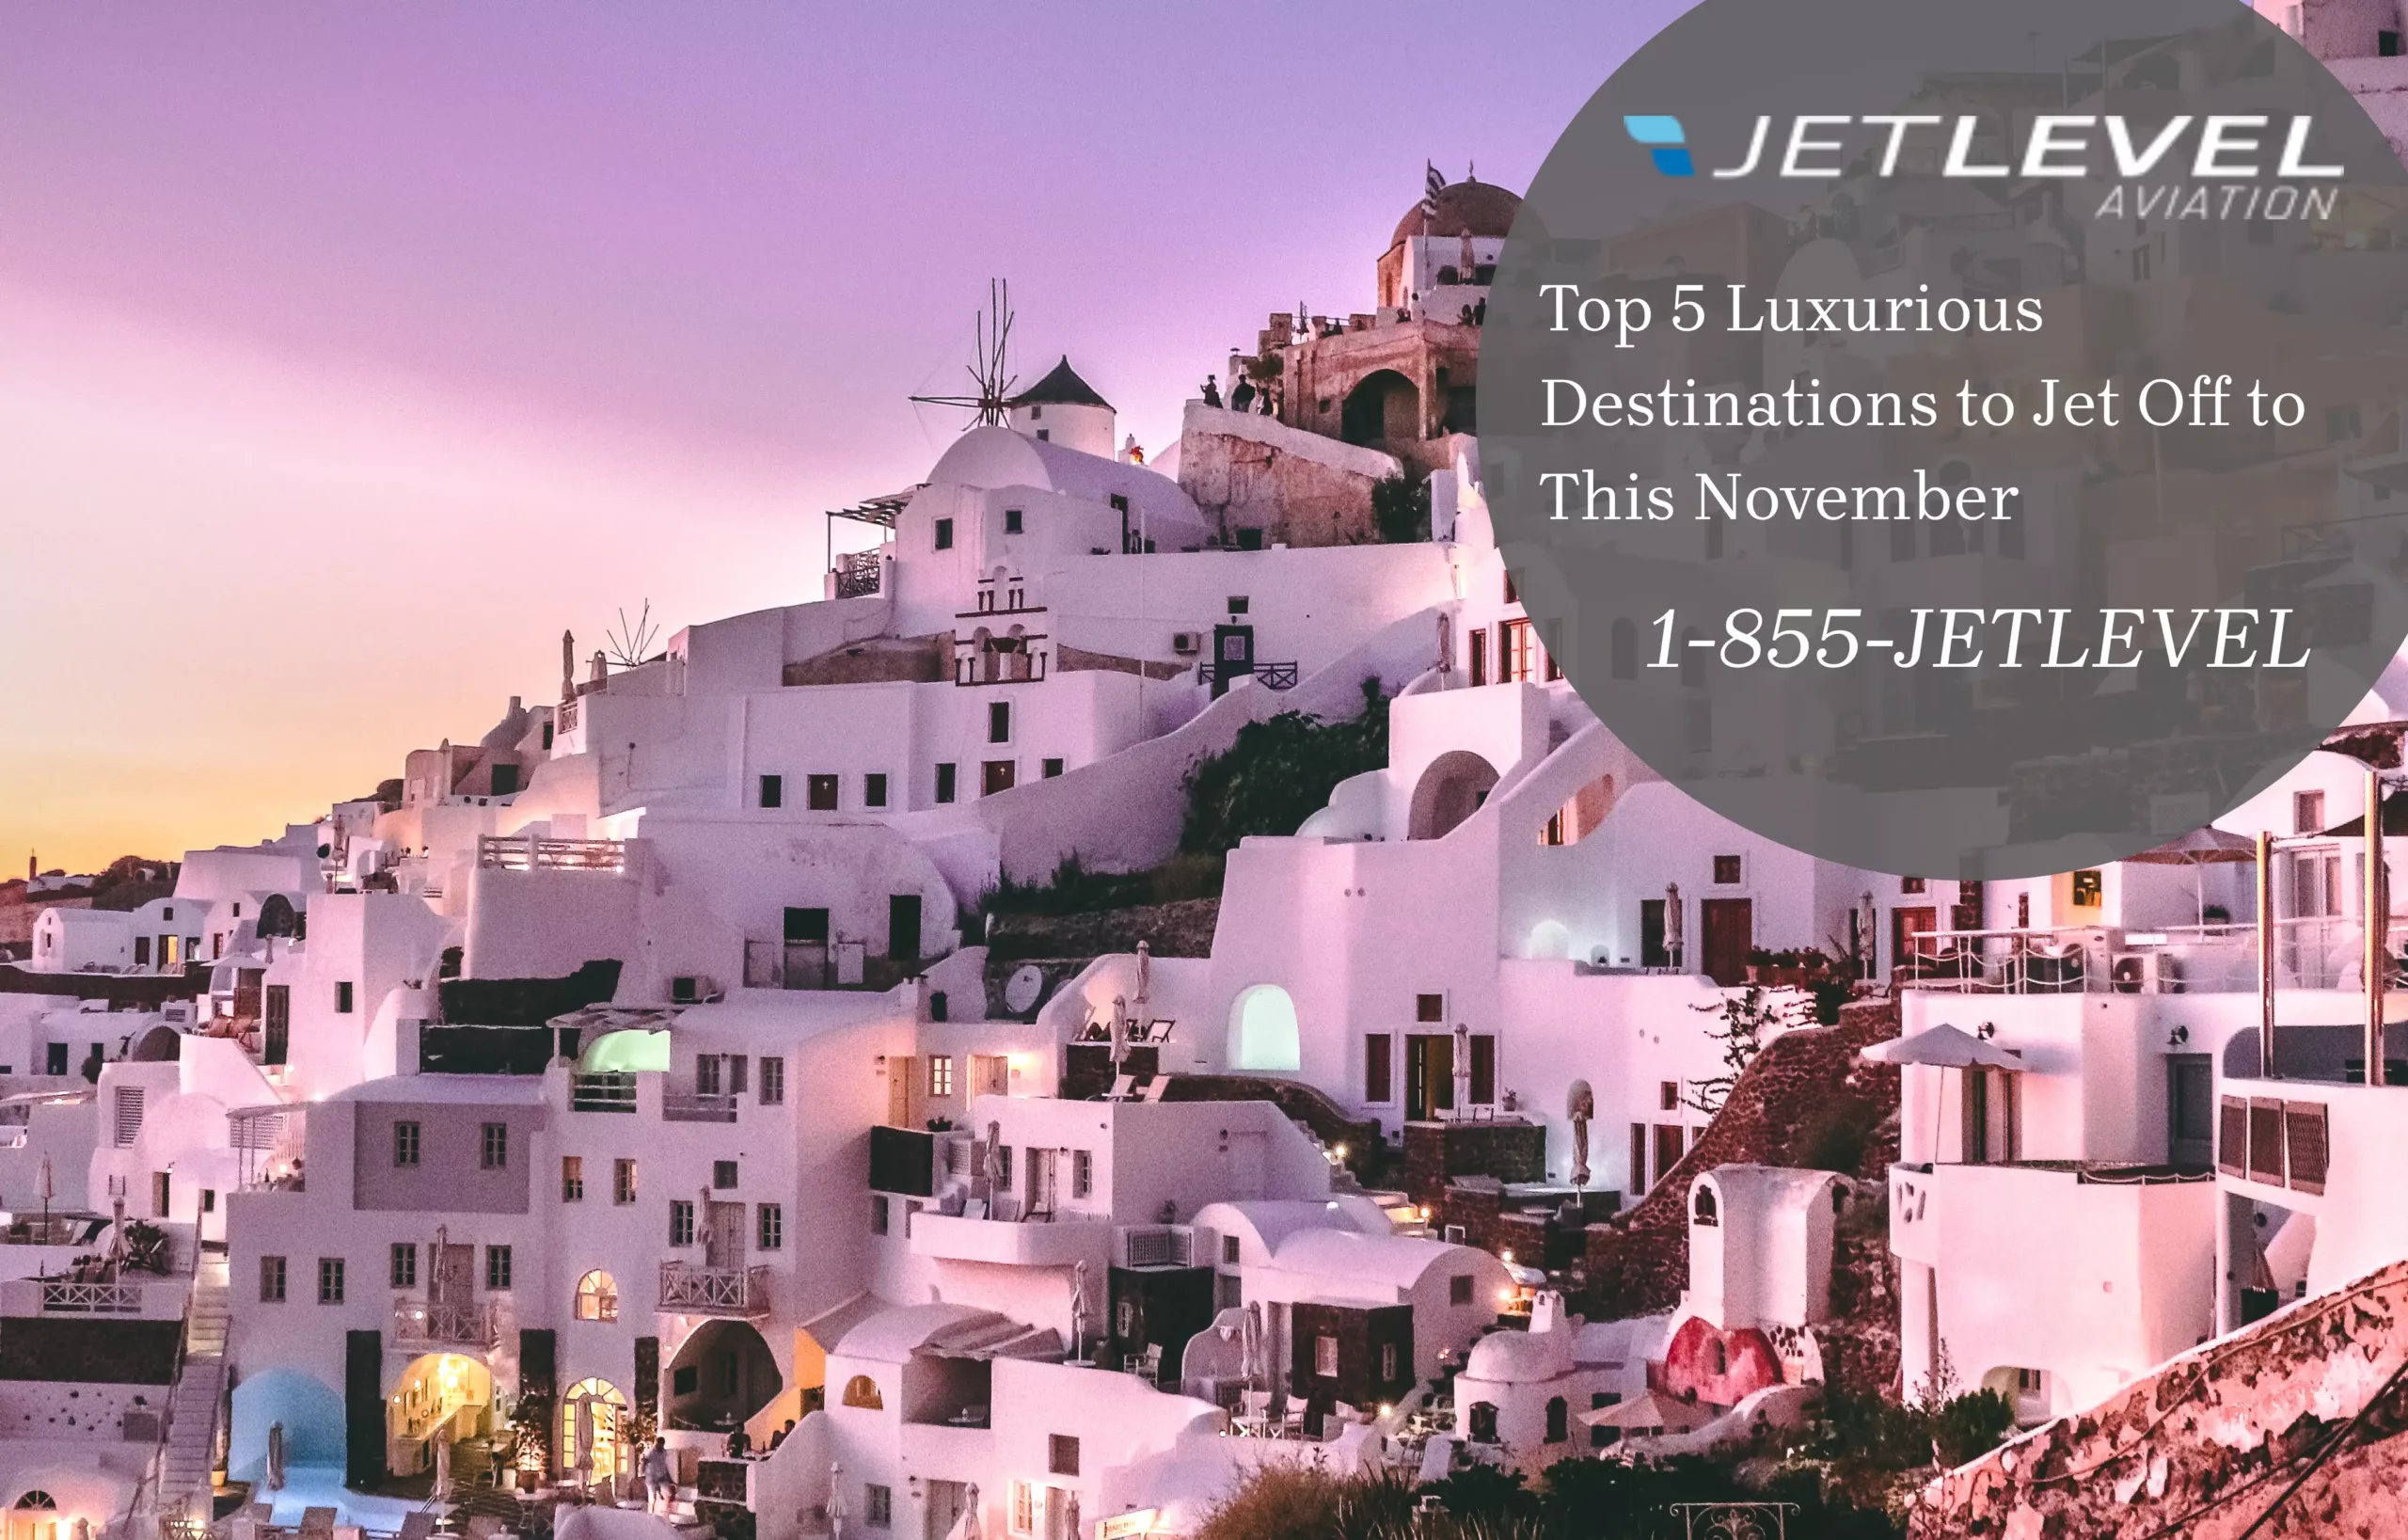 Top 5 Luxurious Destinations to Jet Off to This November